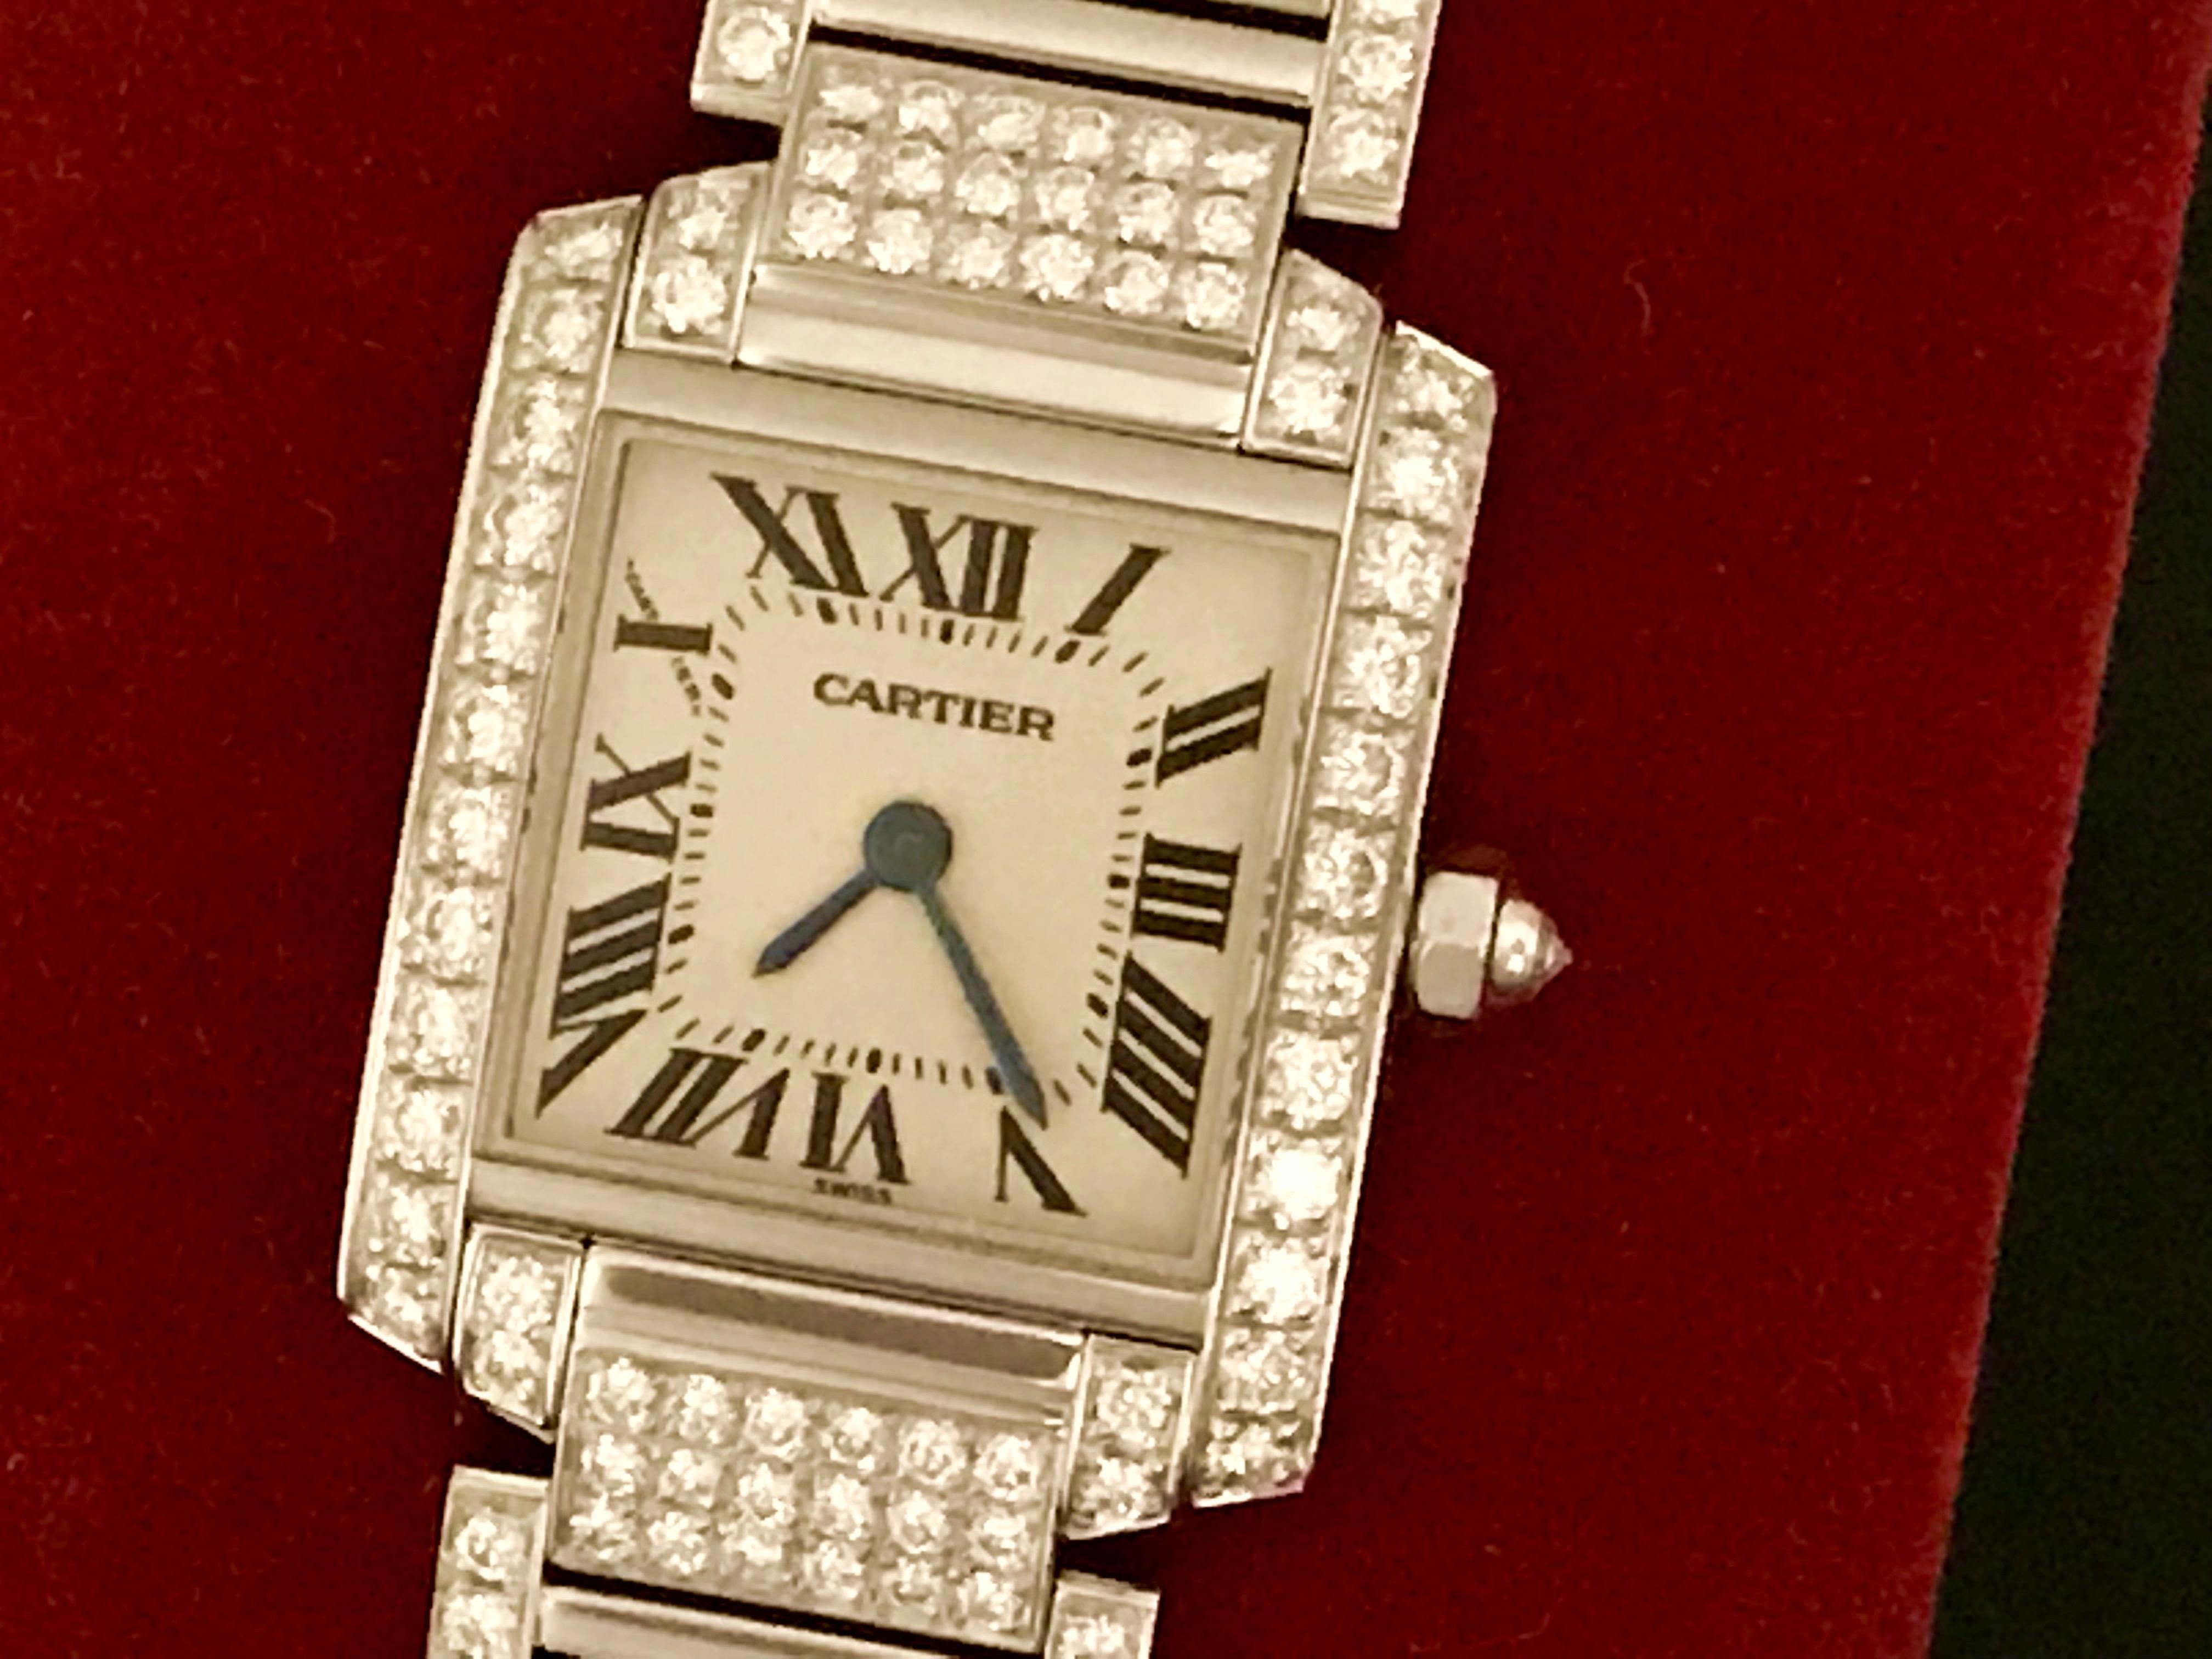 Very rare Cartier Ladies Tank Francaise Model WE1002SD in Like New Condition. Quartz movement. 18k White Gold case with Cartier pave Diamond bezel and Diamond cabachon setting crown (20x25mm). 18k White Gold Cartier full pave Diamond bracelet with